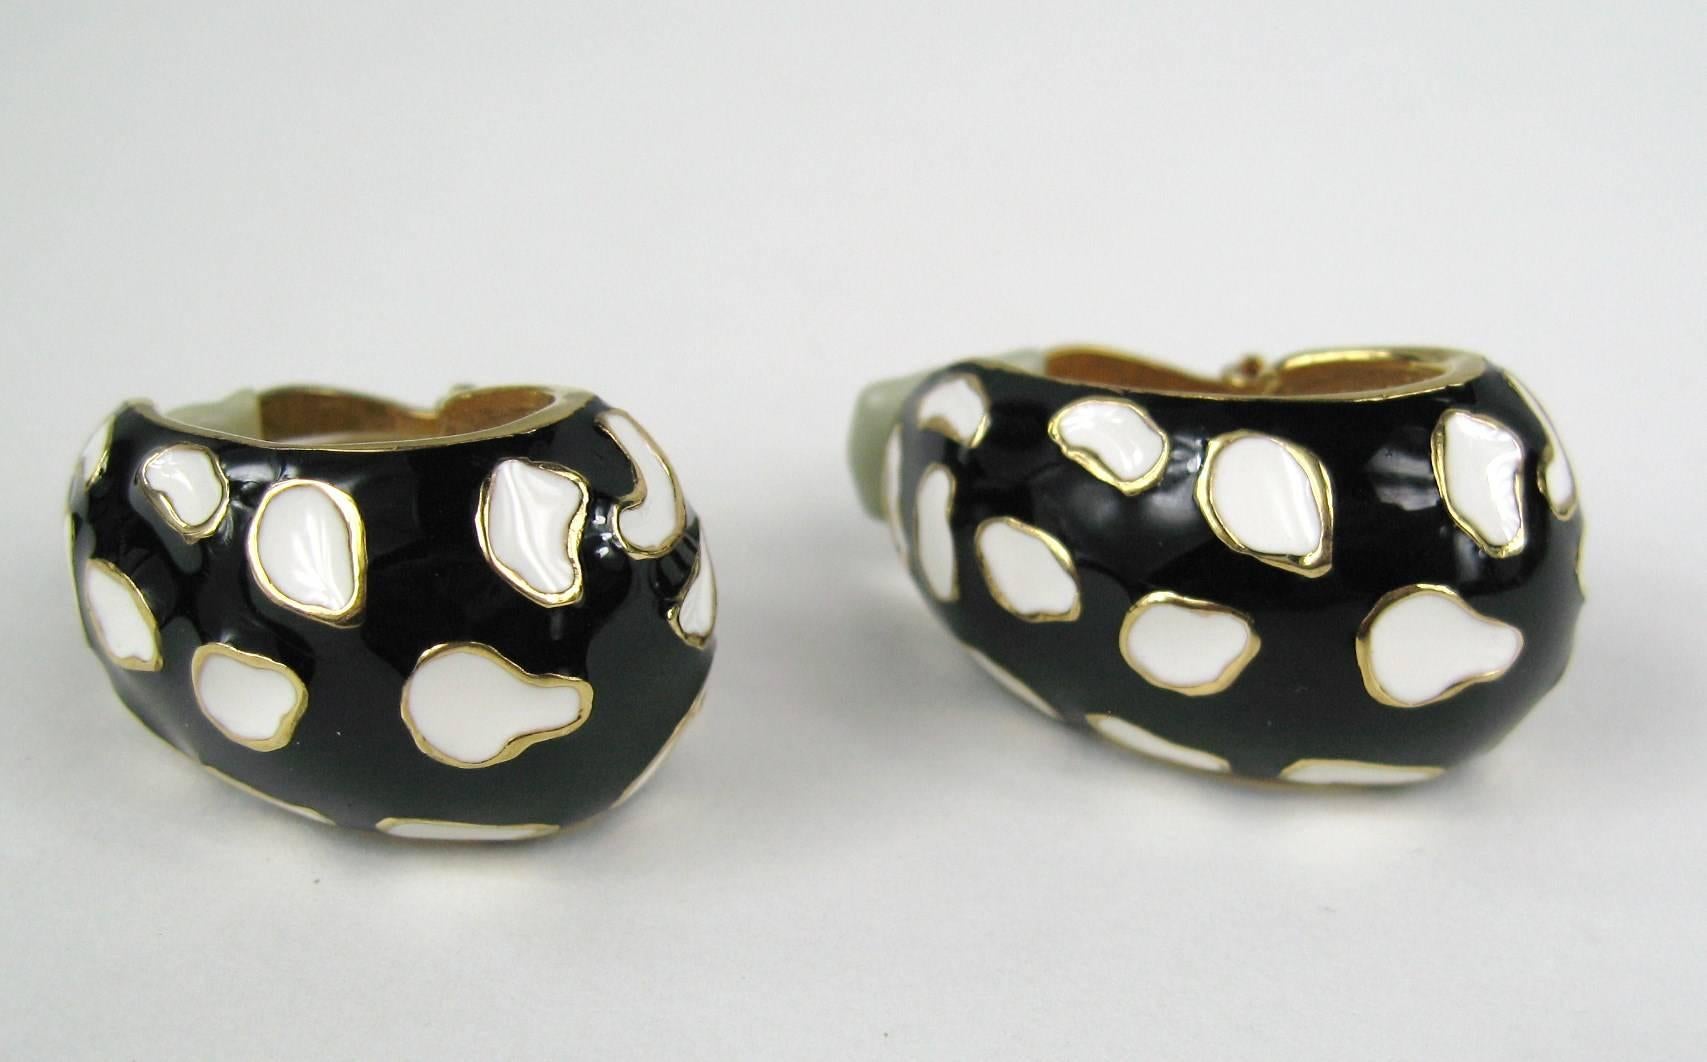 Ciner Black & White with gold tone detailing clip on earrings that measure 1.23 inches  x .78 inches wide. The matching bracelet is on our storefront as well. We have matching sets up on our storefront of many designer jewelry. This is out of a